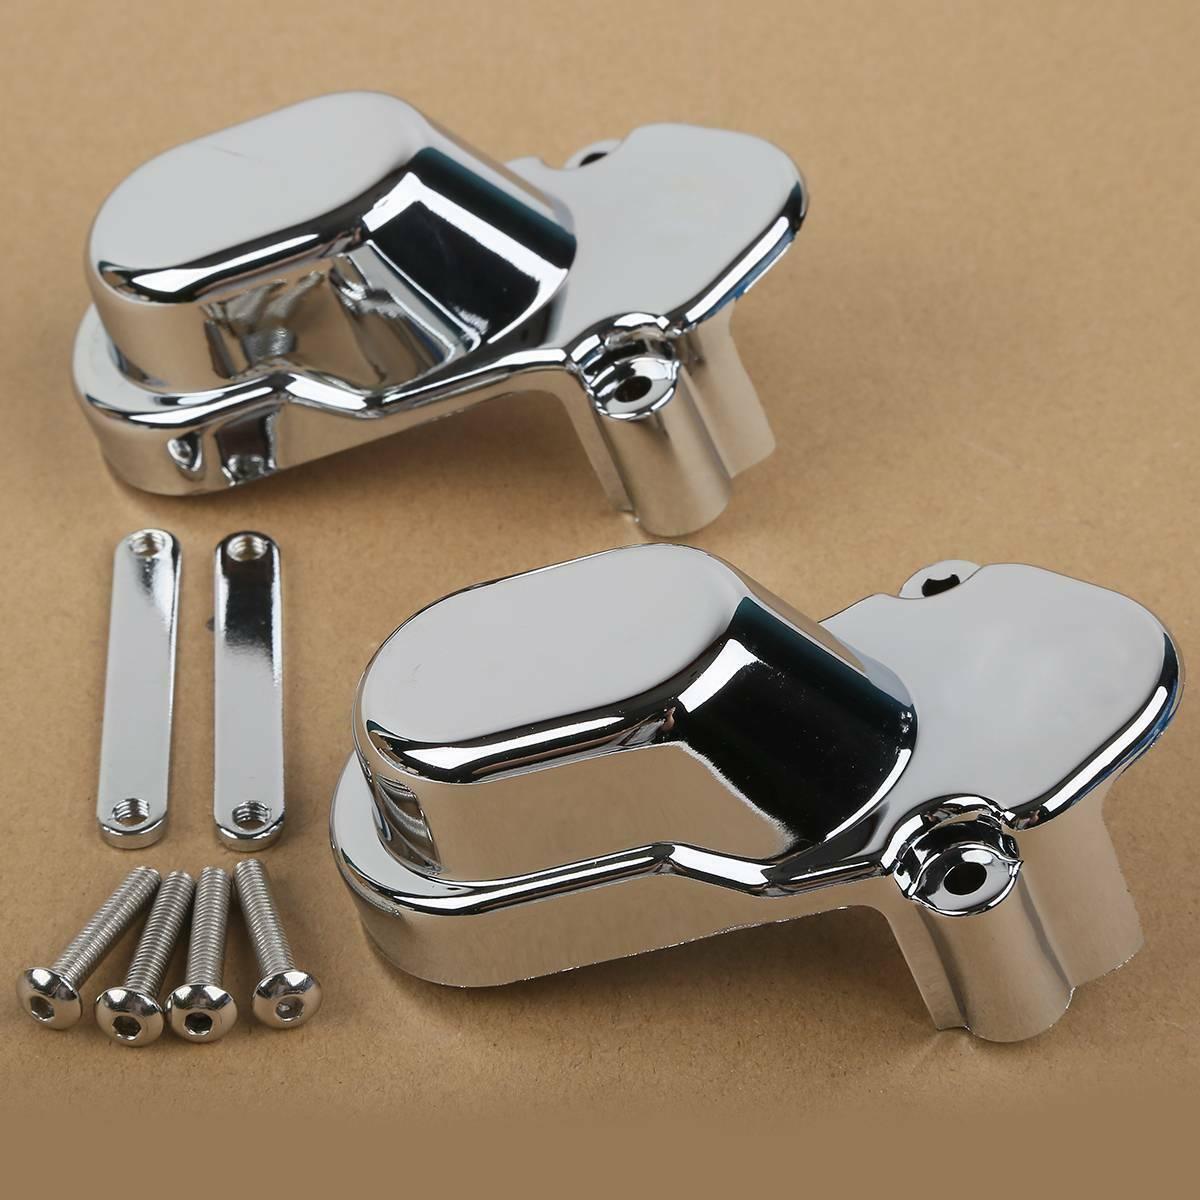 Chrome ABS Rear Wheel Axle Kit Cover For Harley Davidson Sportster 1200 883 New - Moto Life Products